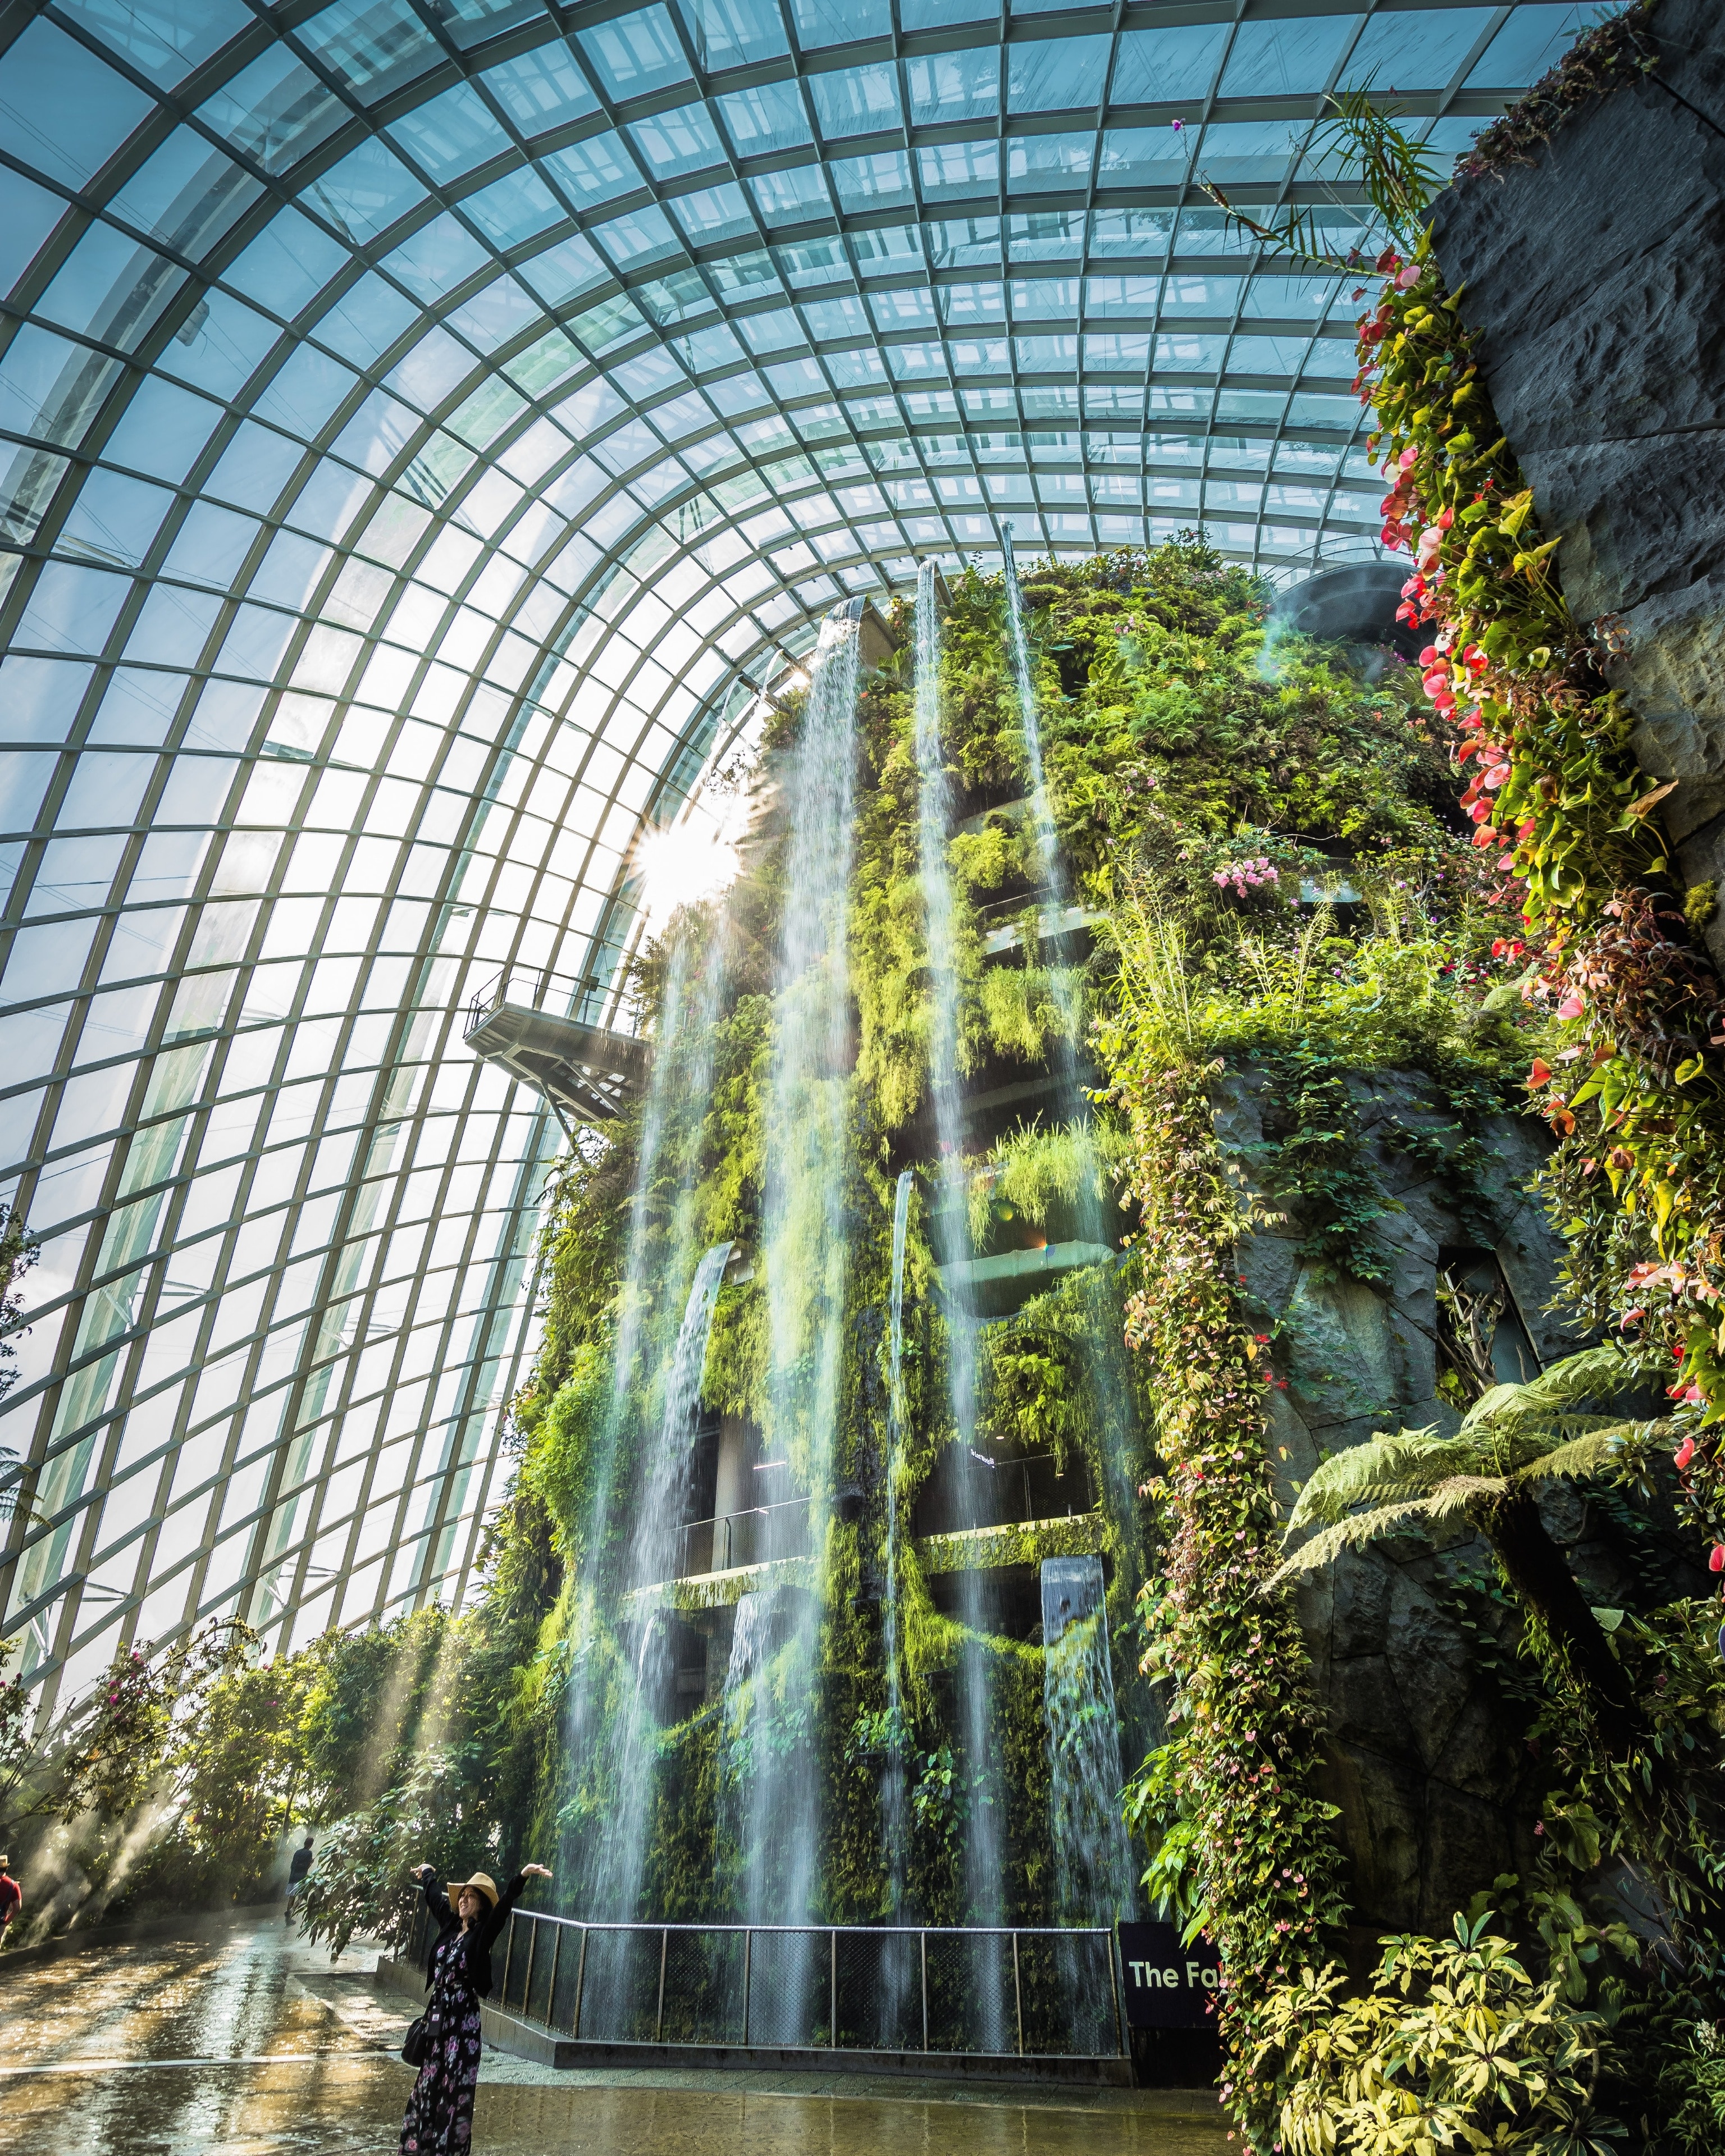 At over 30 metres tall, this indoor waterfall is amazing to see!